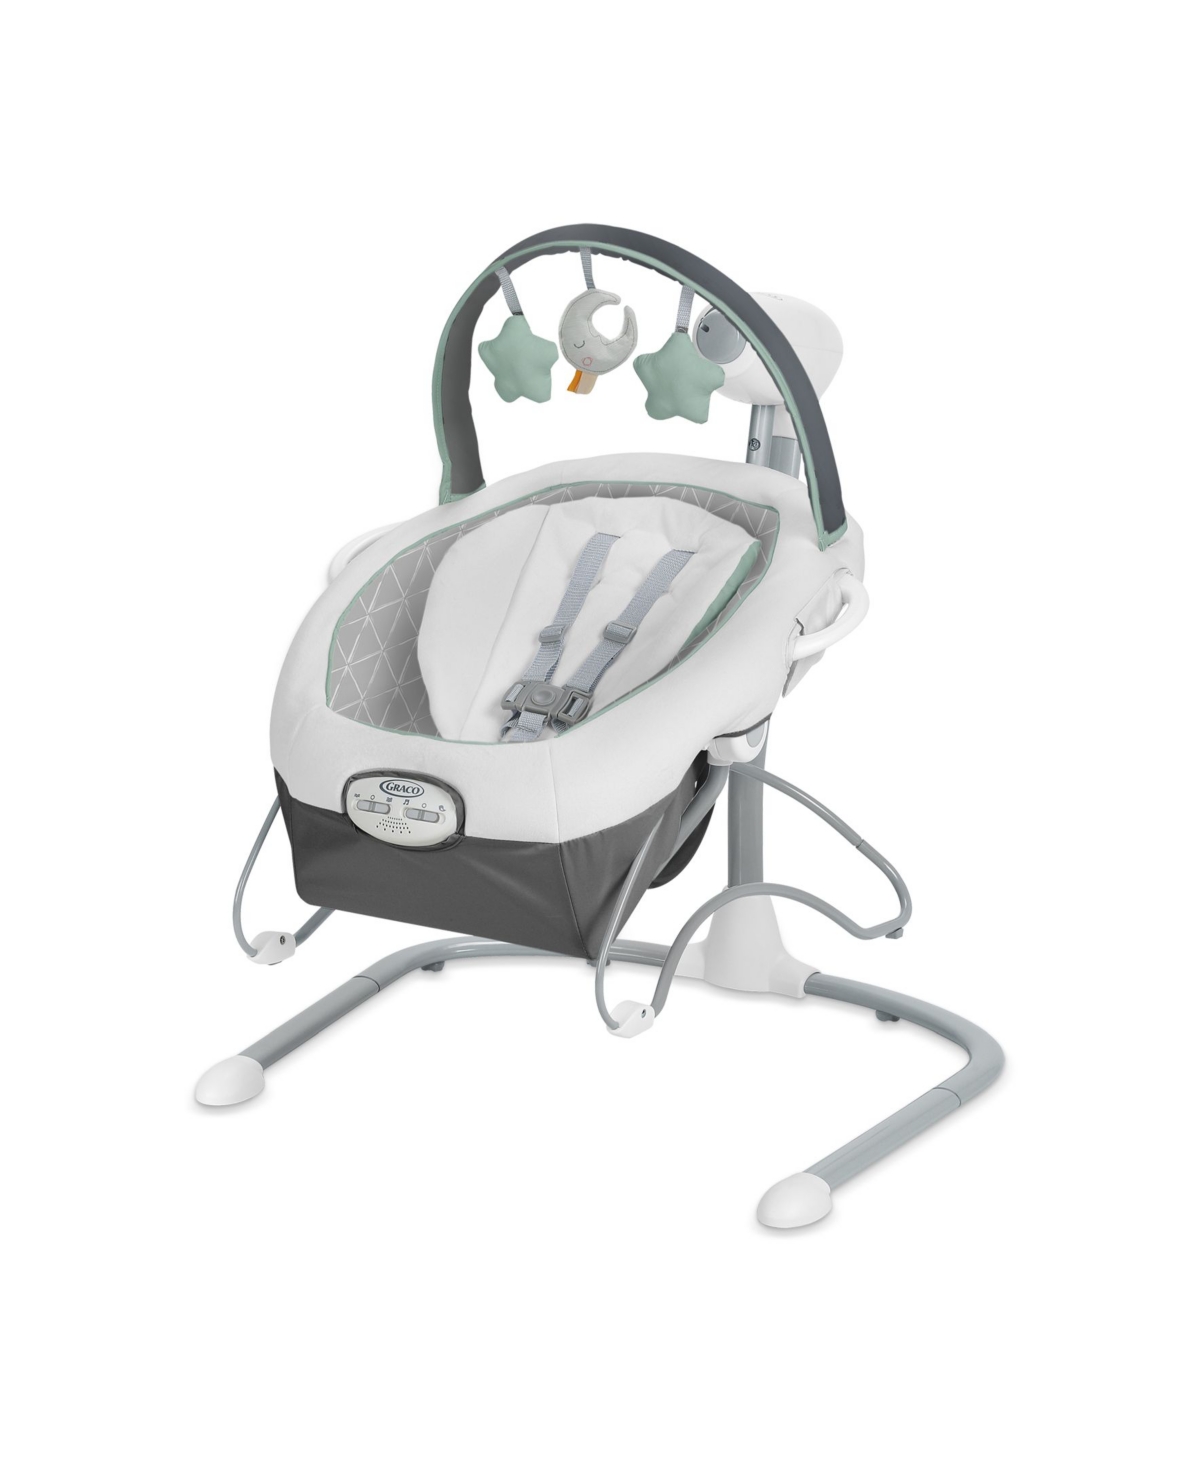 Graco Soothe 'n Sway Lx Baby Swing With Portable Bouncer In Open Miscellaneous